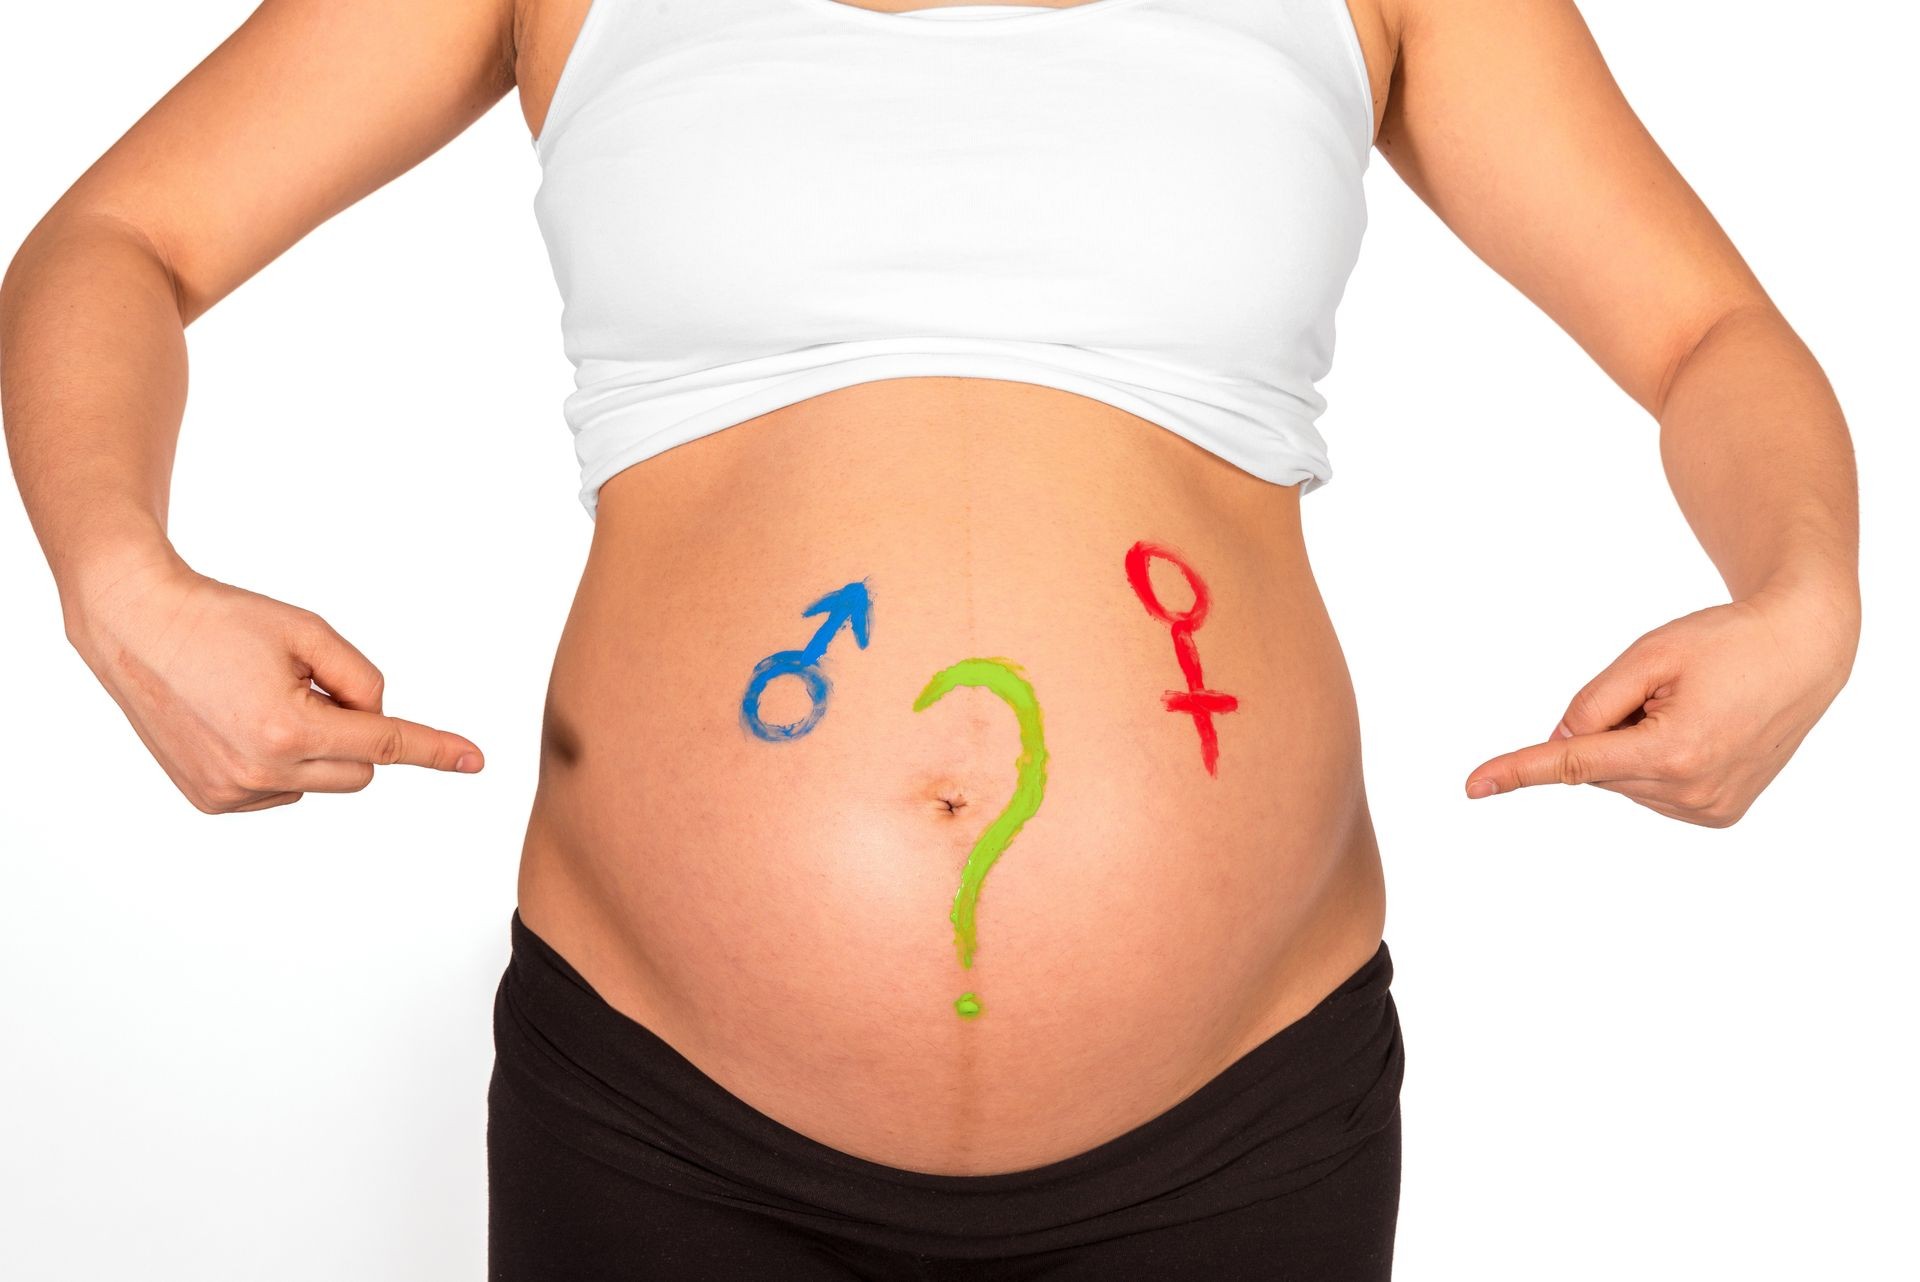 Pregnant woman with question mark and gender symbols painted with finger paint on bare belly dealing with gender question in front of white background